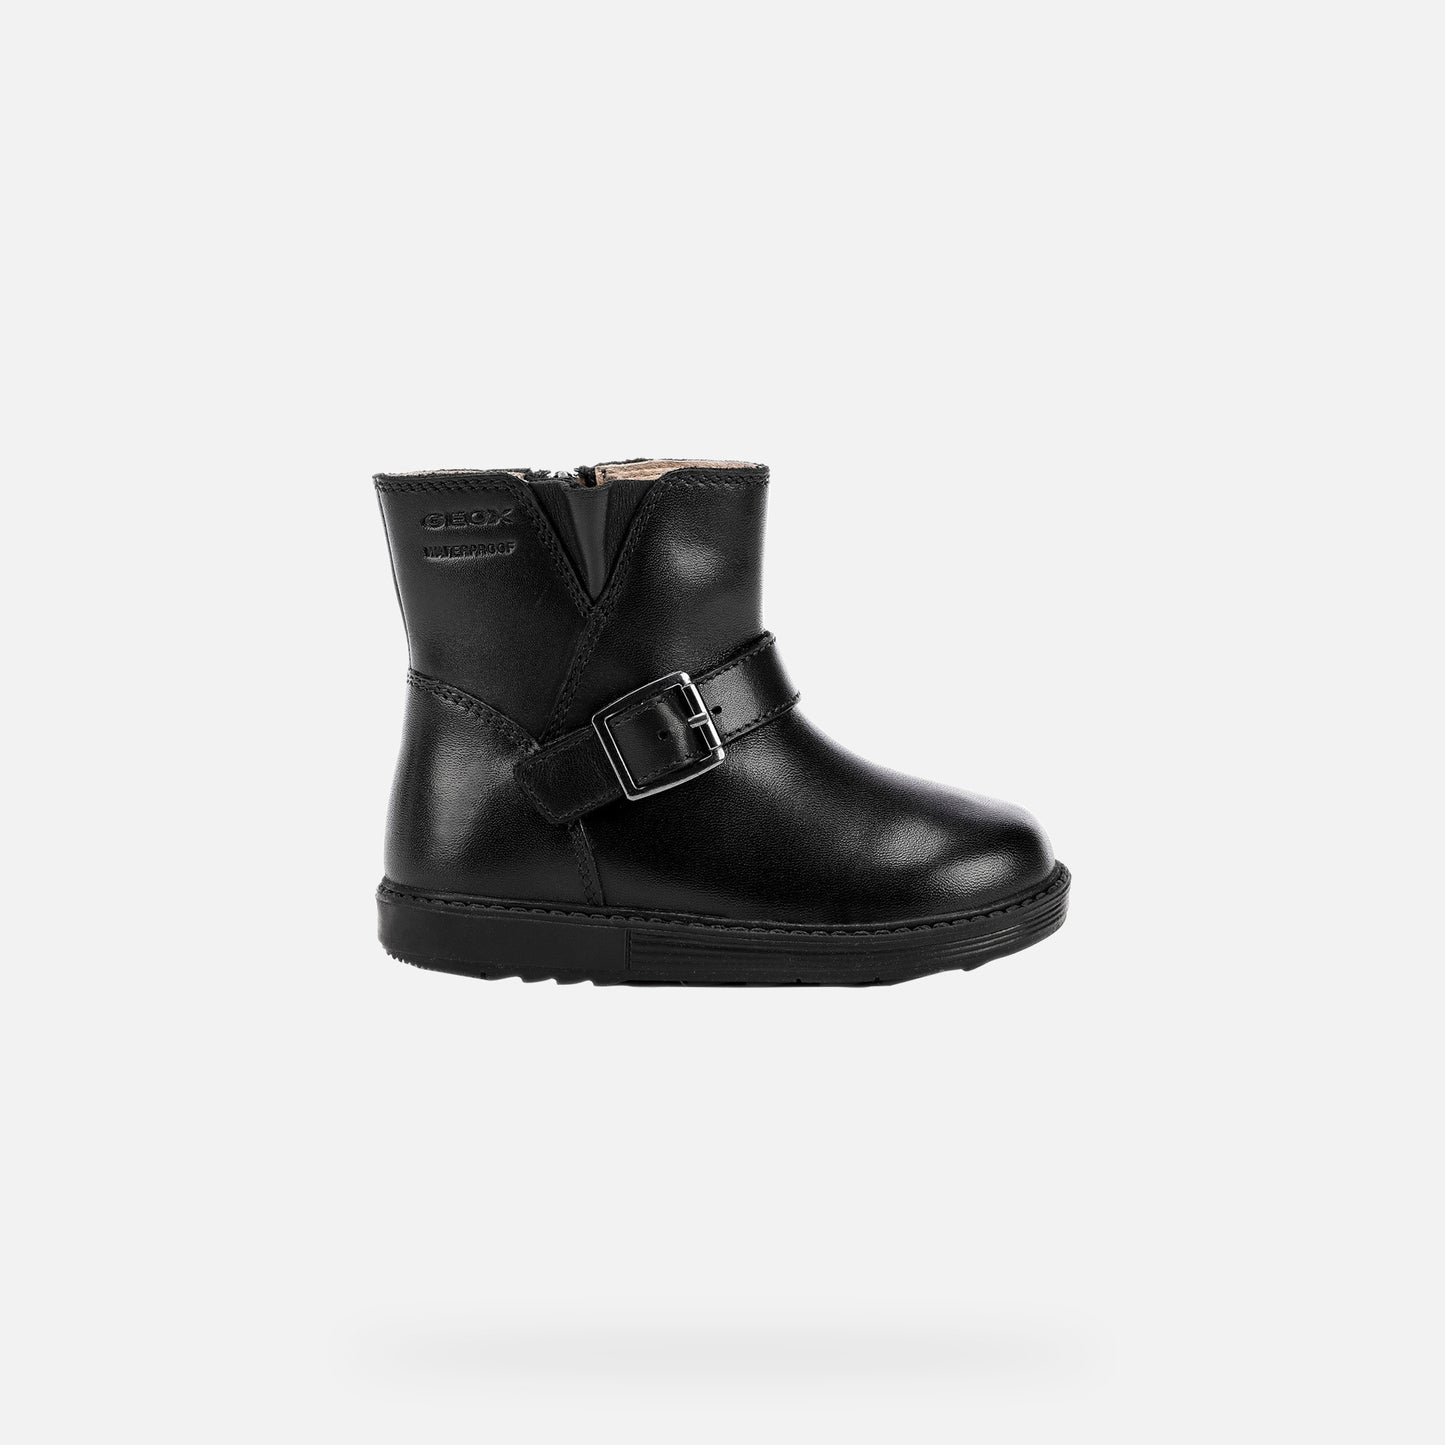 A girls waterproof ankle boot by Geox, style is Hynde in Black leather with zip side fastening and buckle across the top to alter width. Right side view.